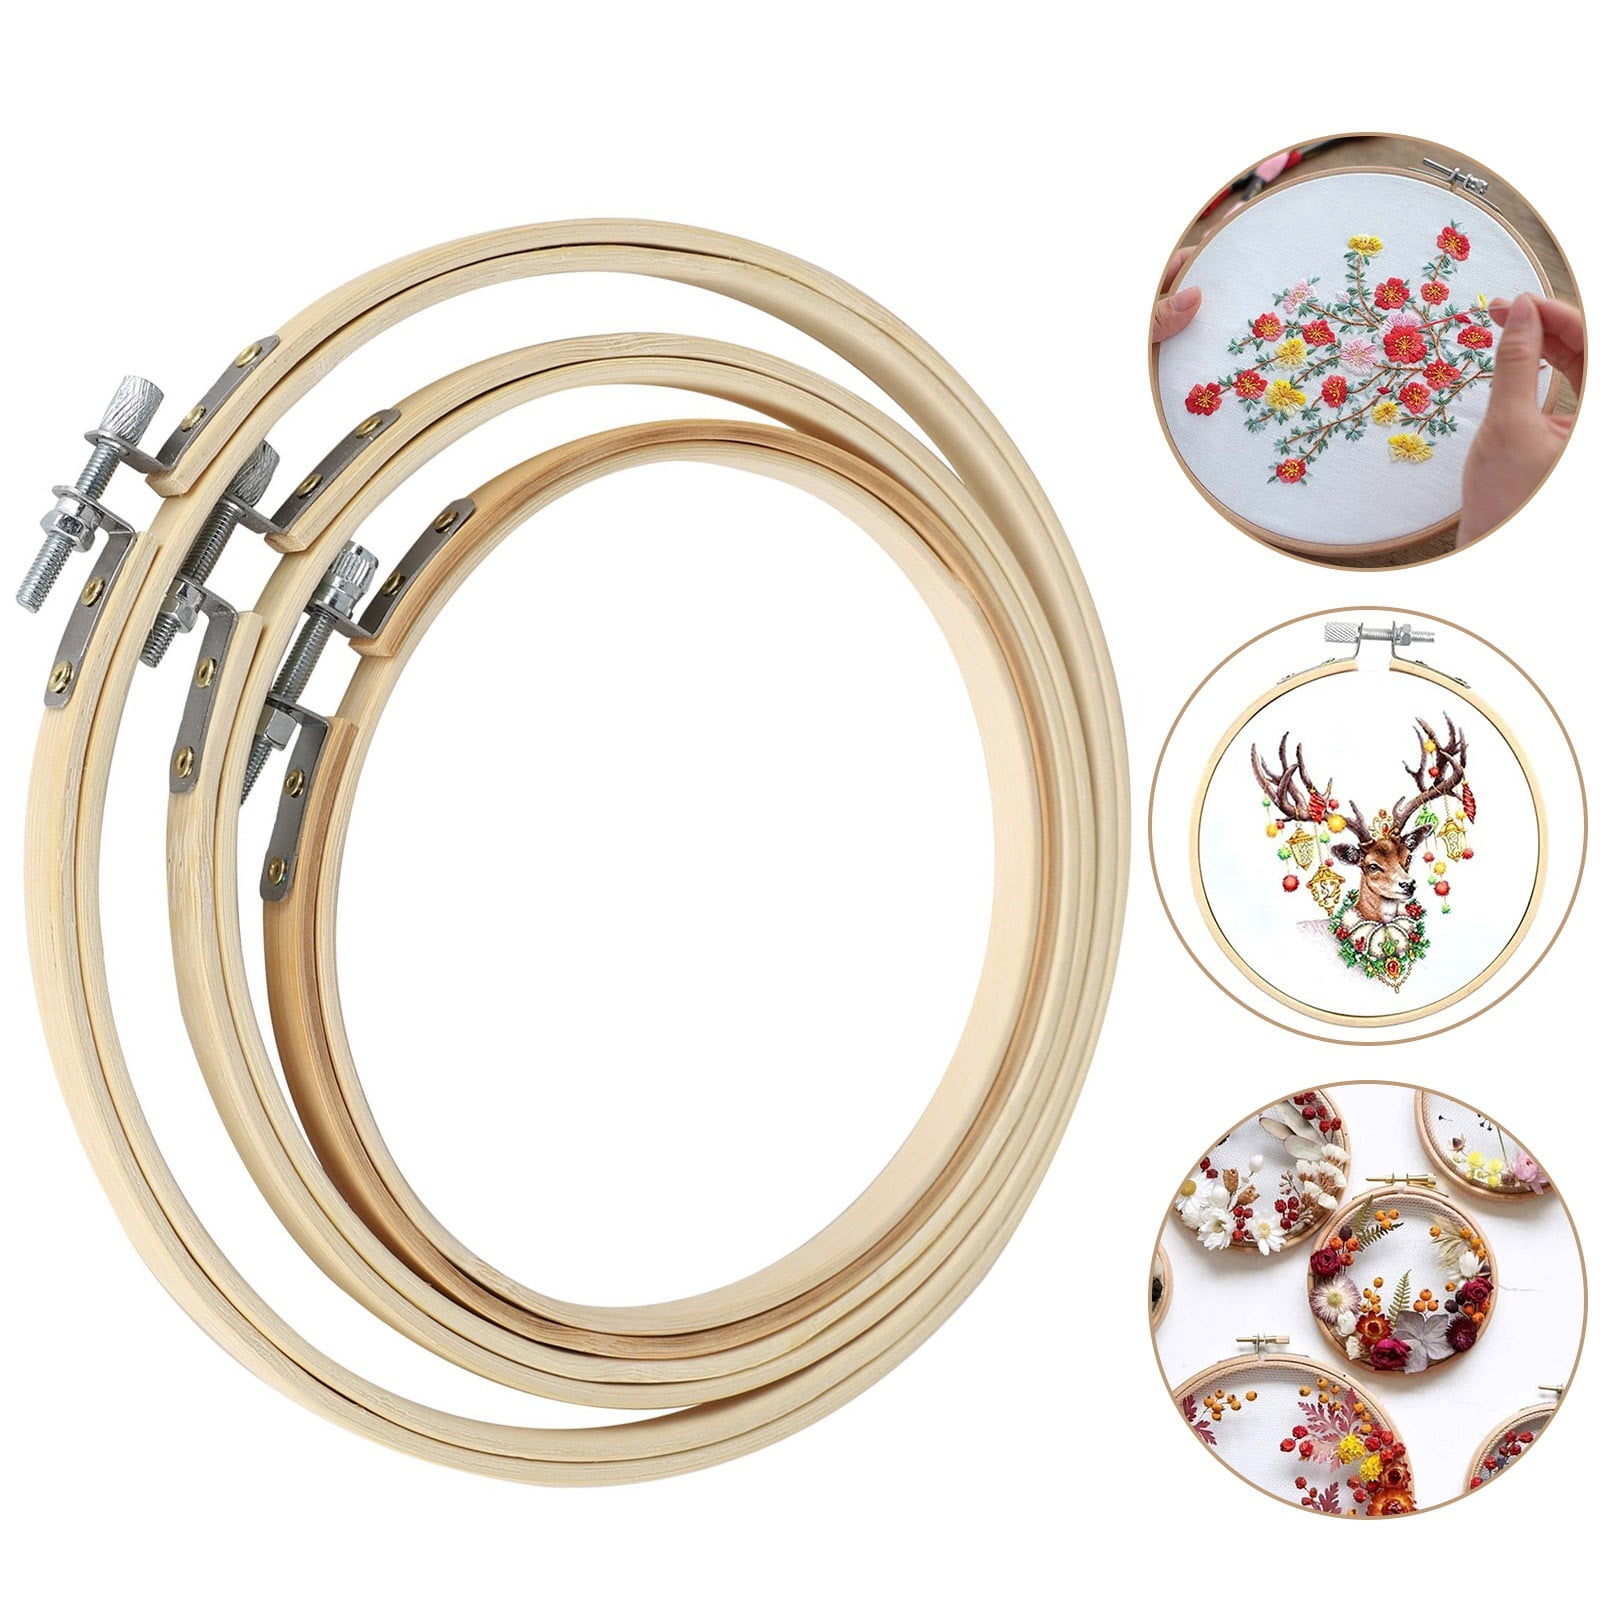 3pcs Embroidery Hoop Set Bamboo Circle Cross Stitch Needlework Hoop Ring  for Embroidery and Cross Stitch, 5